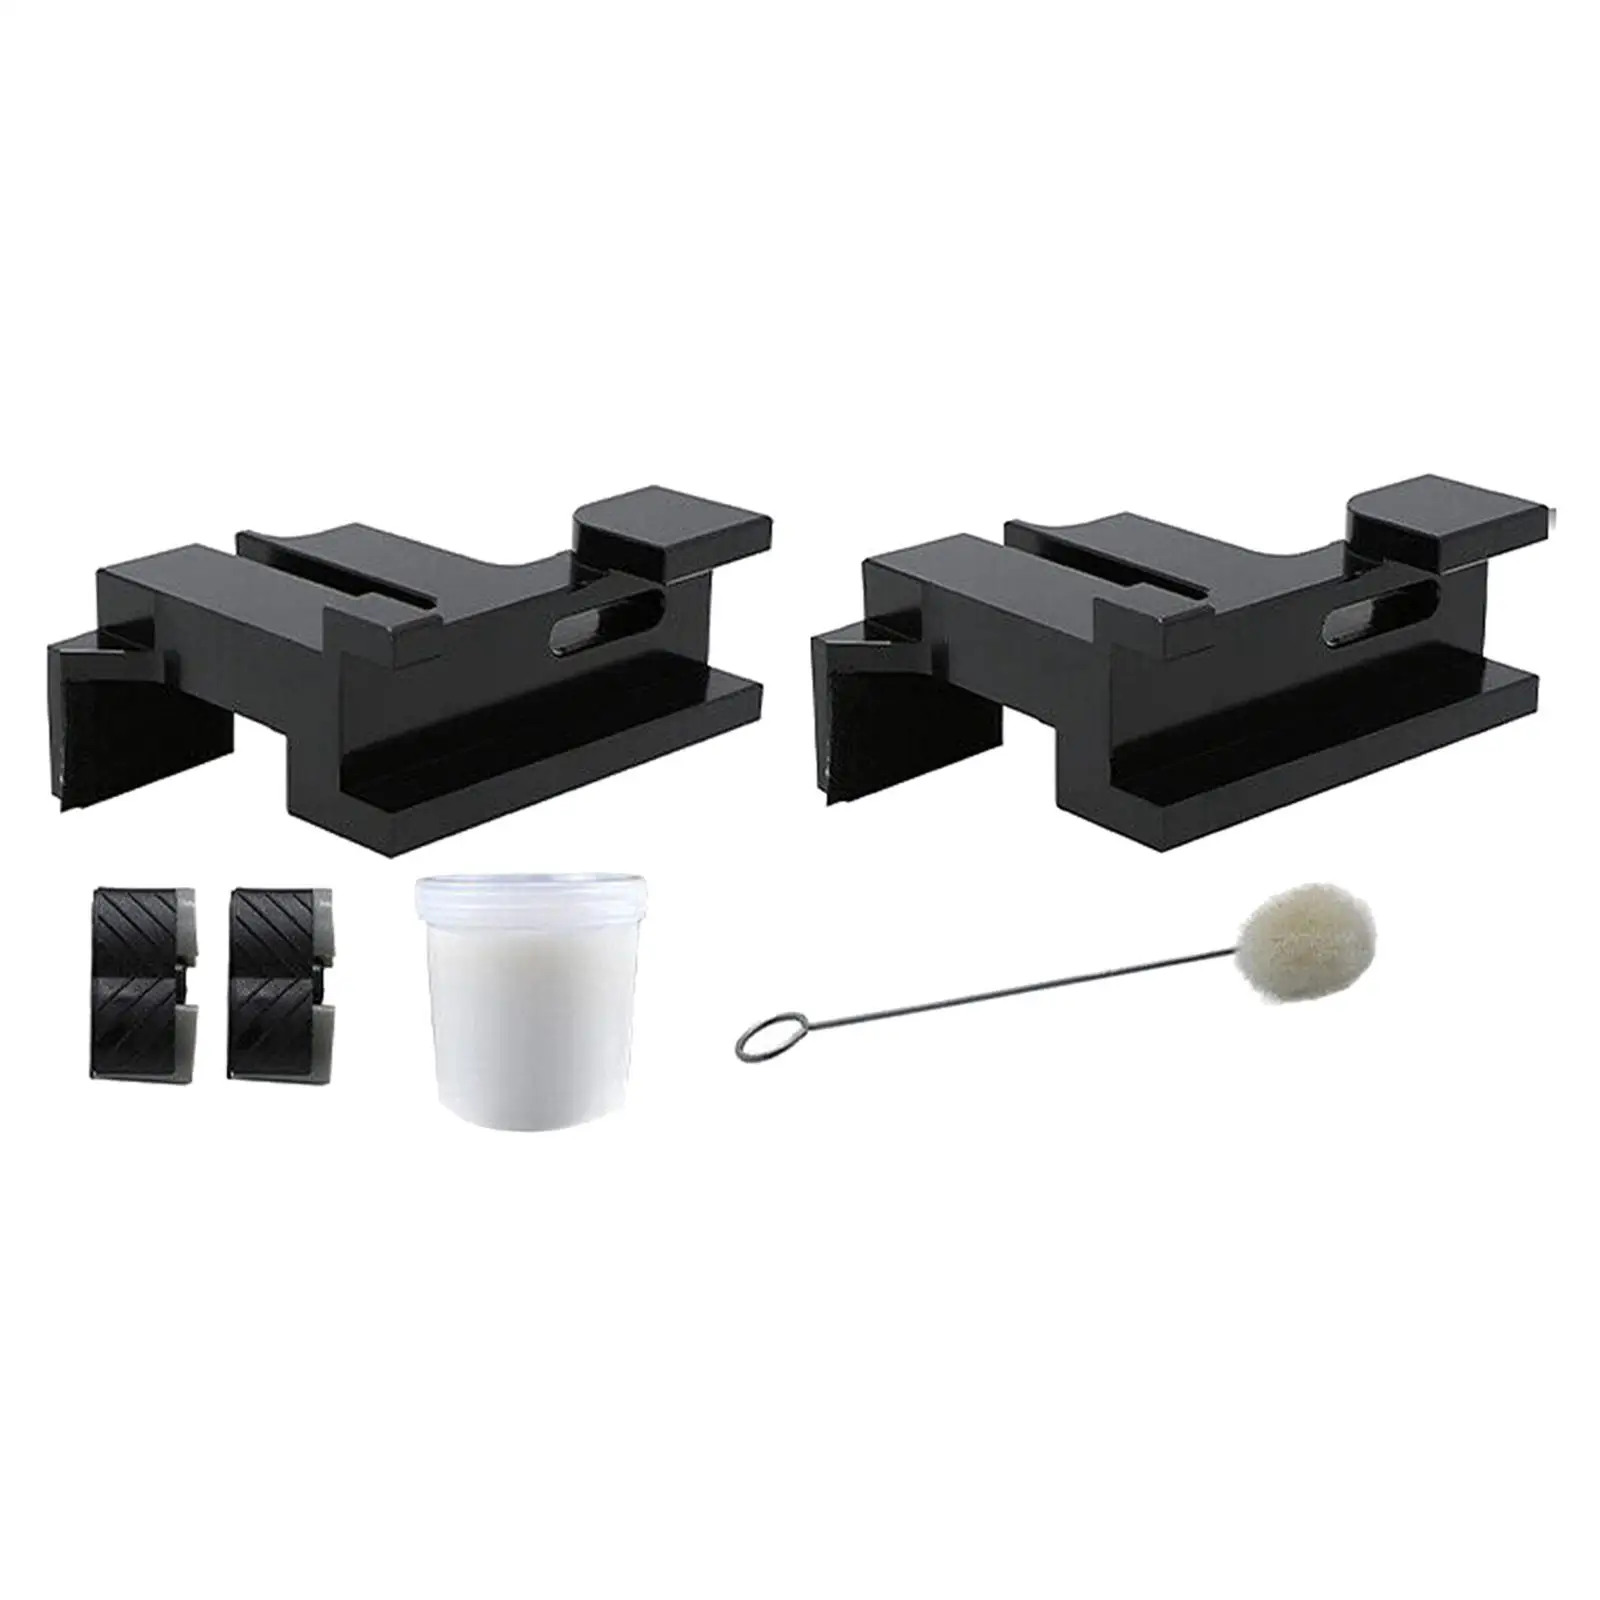 Sunroof Rails Repair Set, Durable Professional Spare Parts Replaces Part for Mkx